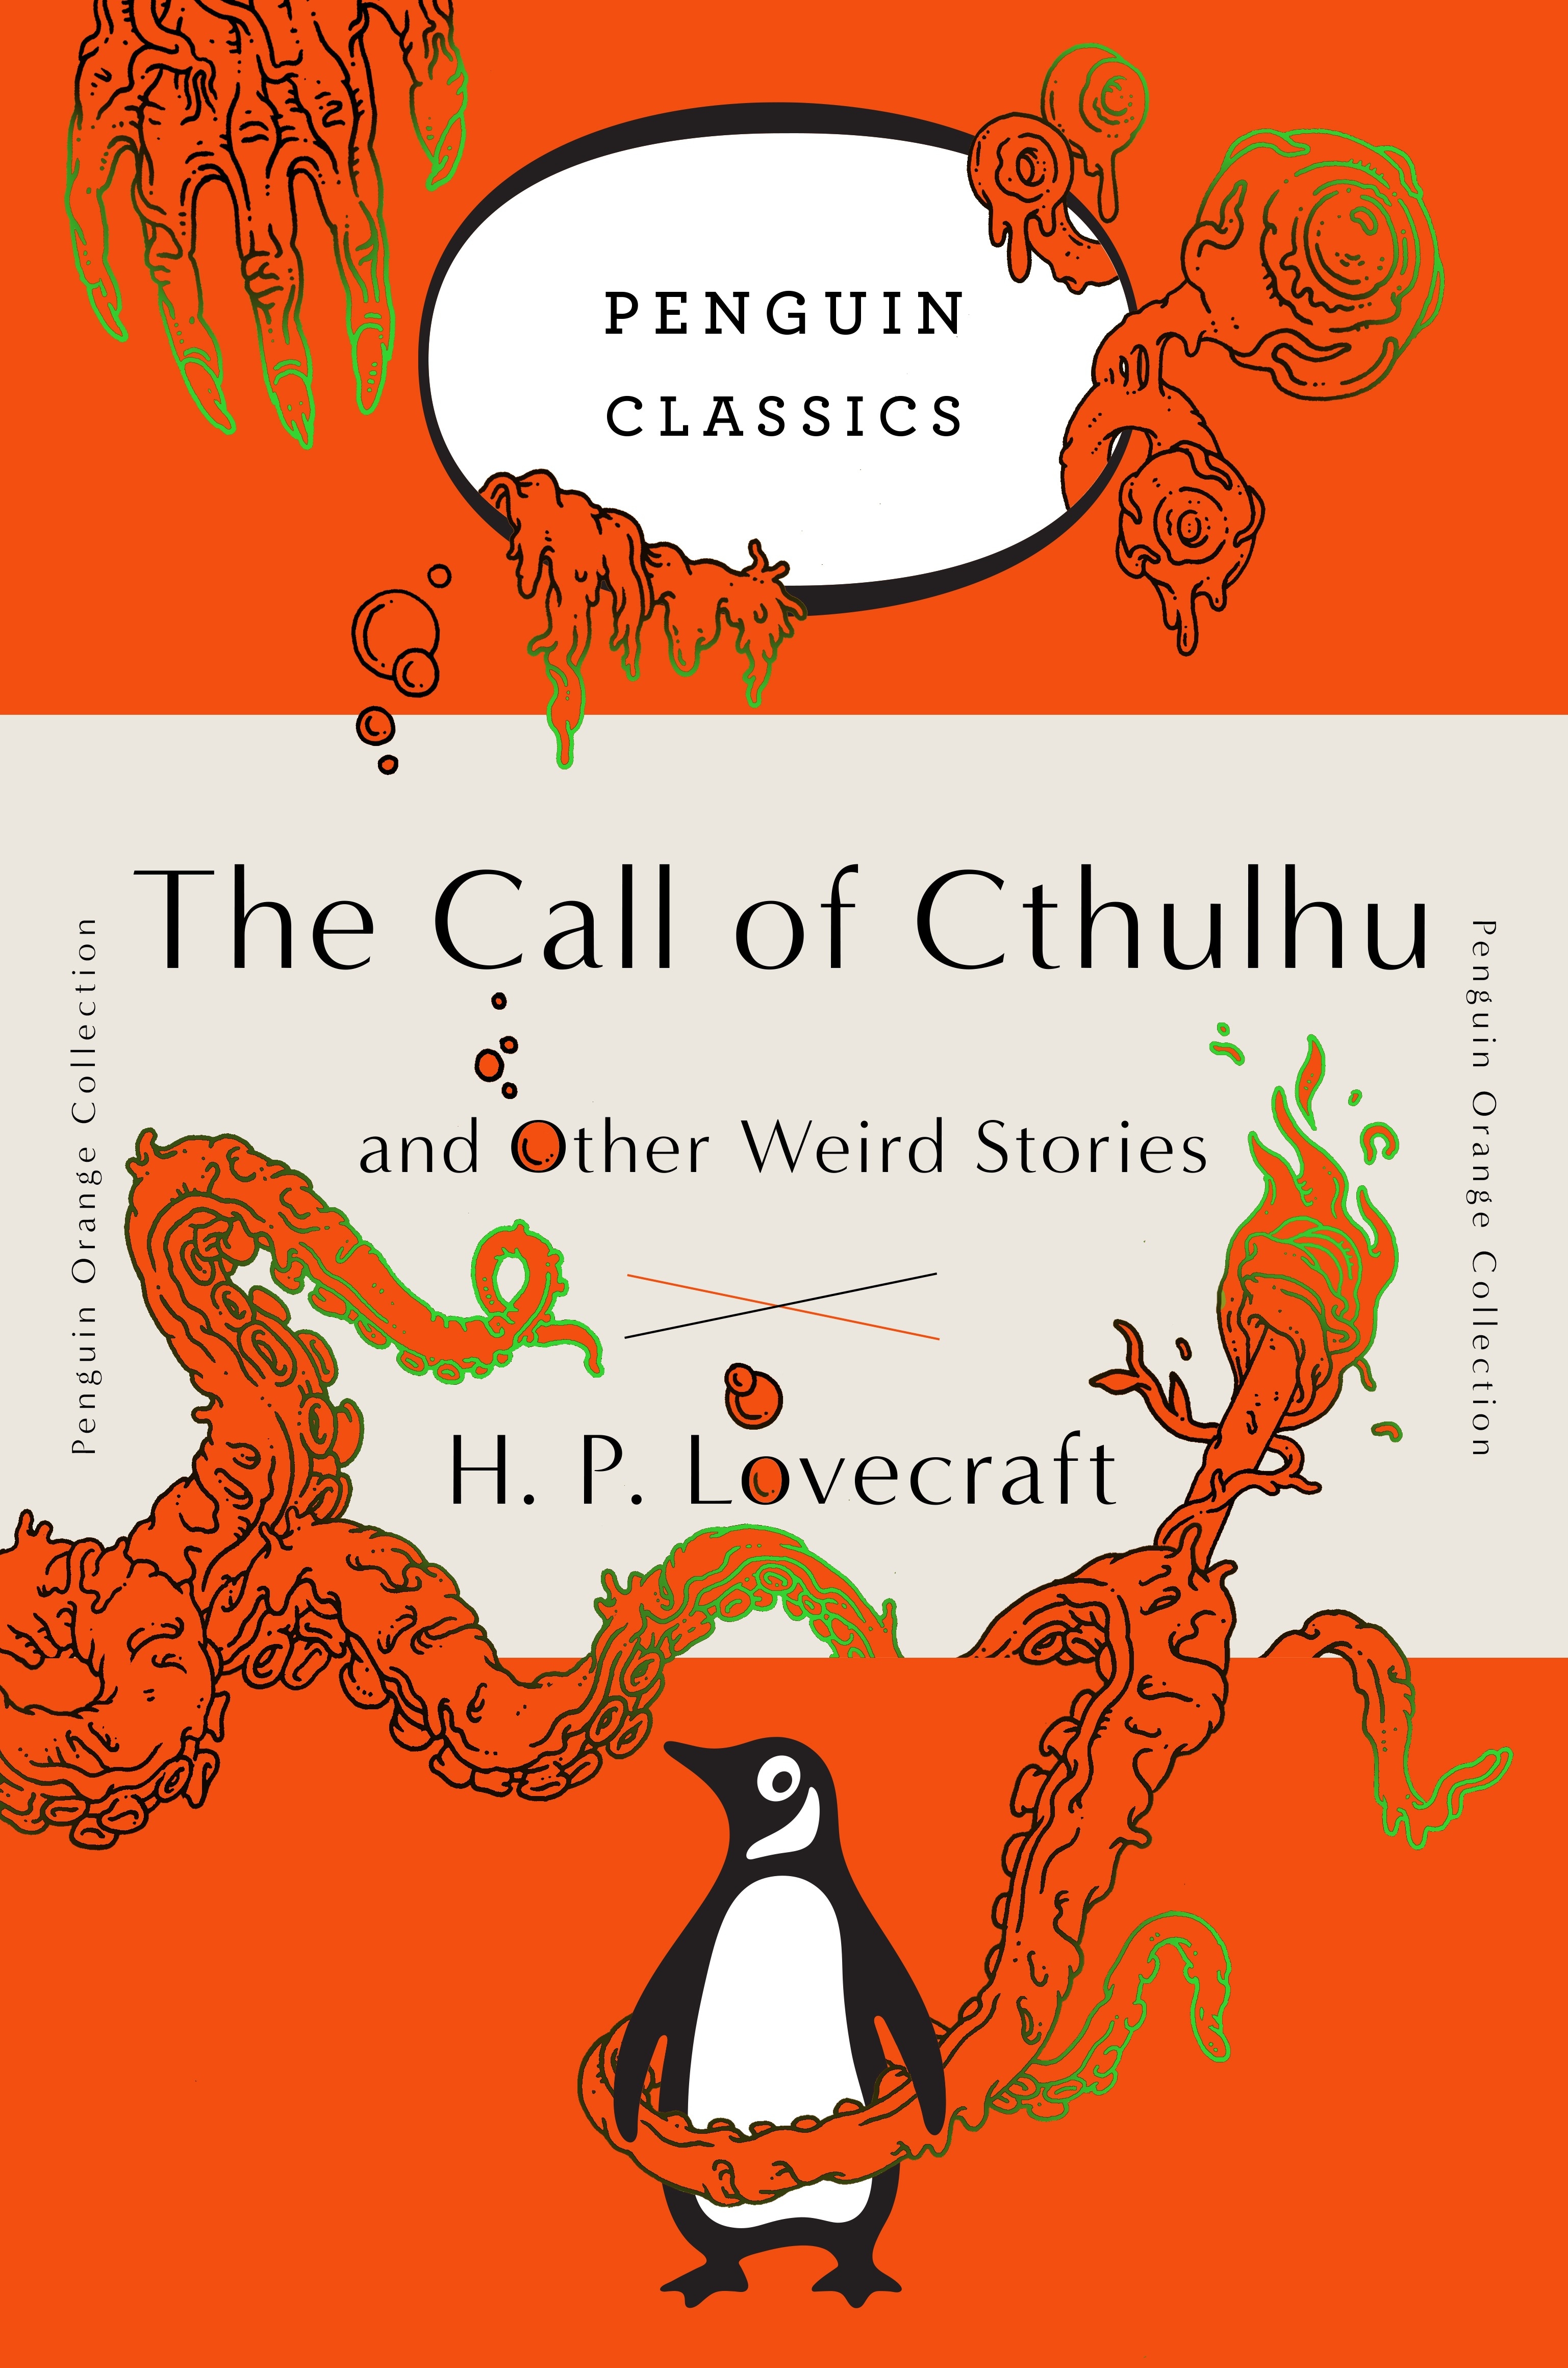 The Call of Cthulhu and Other Weird Stories by H. P. Lovecraft - Penguin  Books New Zealand